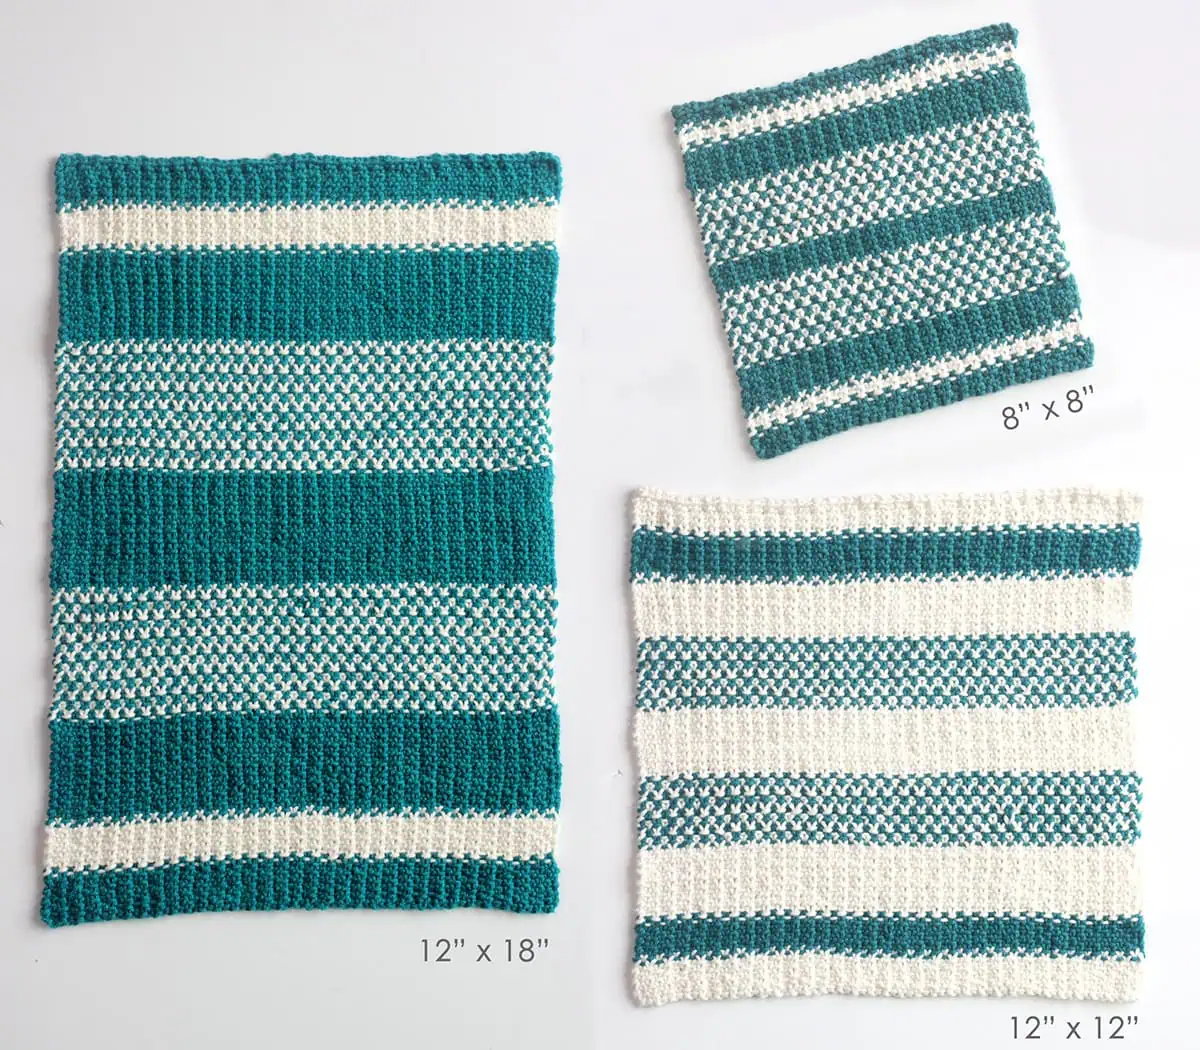 Three knitted dishcloth sizes in the linen stitch in blue and white colored yarn.